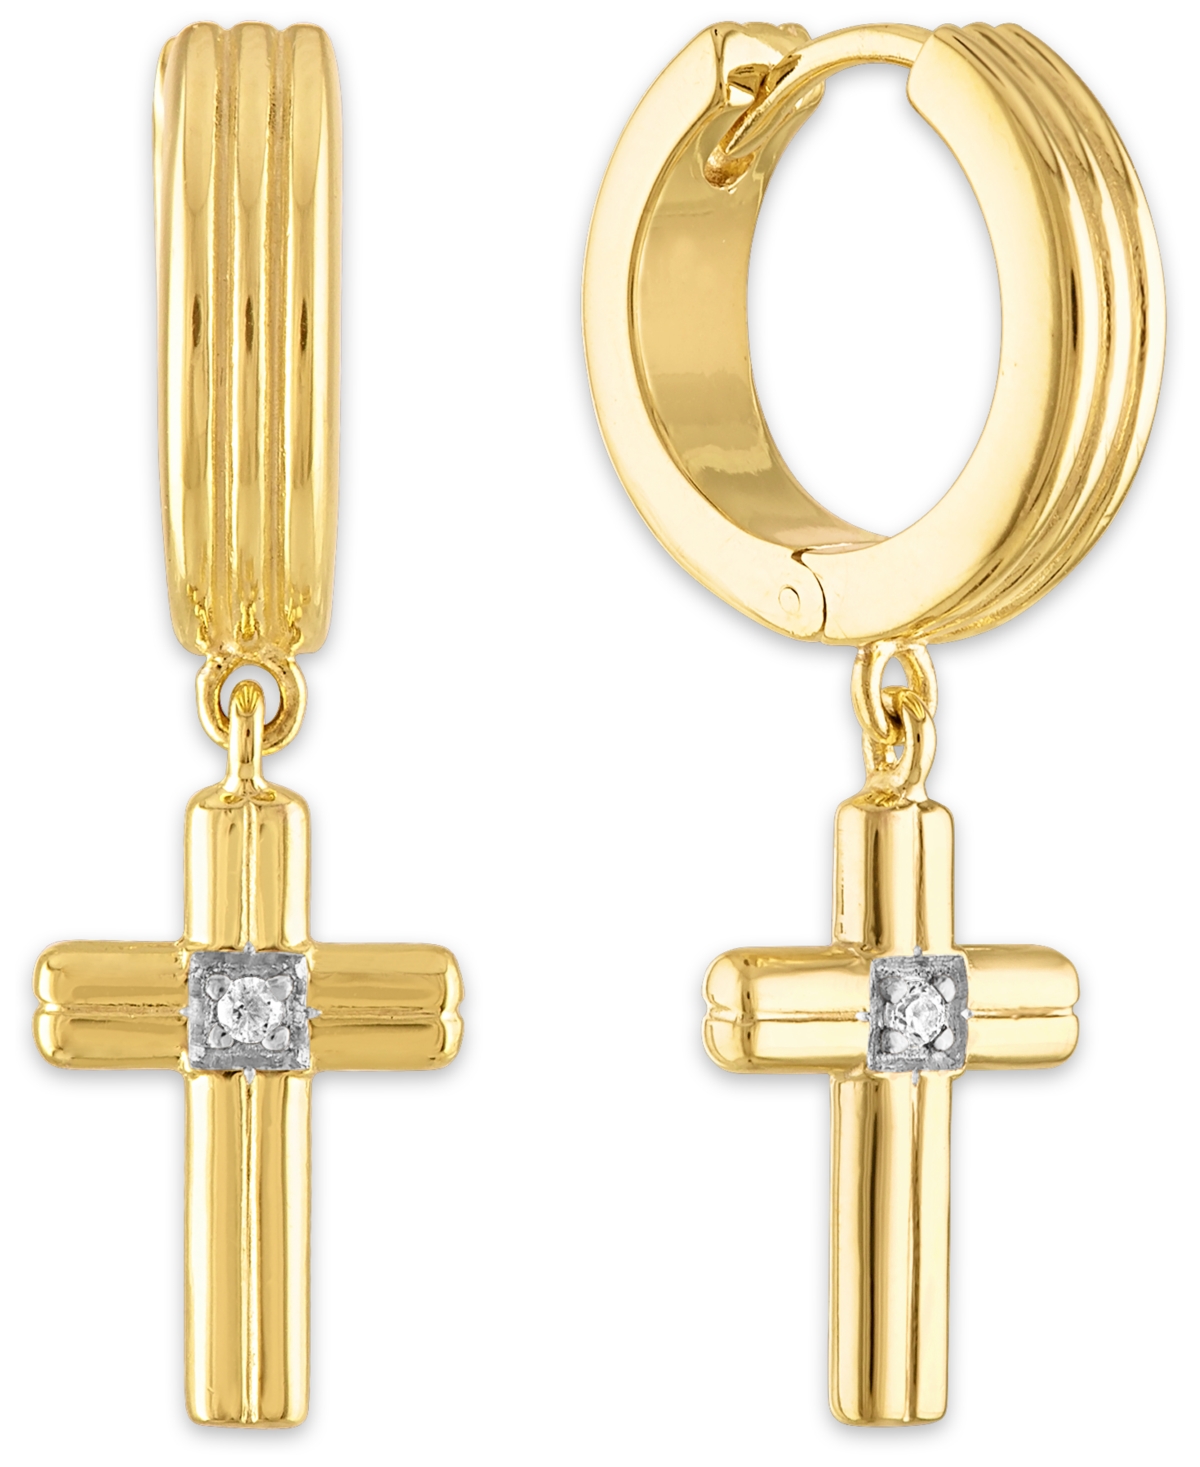 Diamond Accent Cross Drop Hoop Earrings in 14k Gold-Plated Sterling Silver, Sterling Silver or Black Ruthenium over silver, Crea